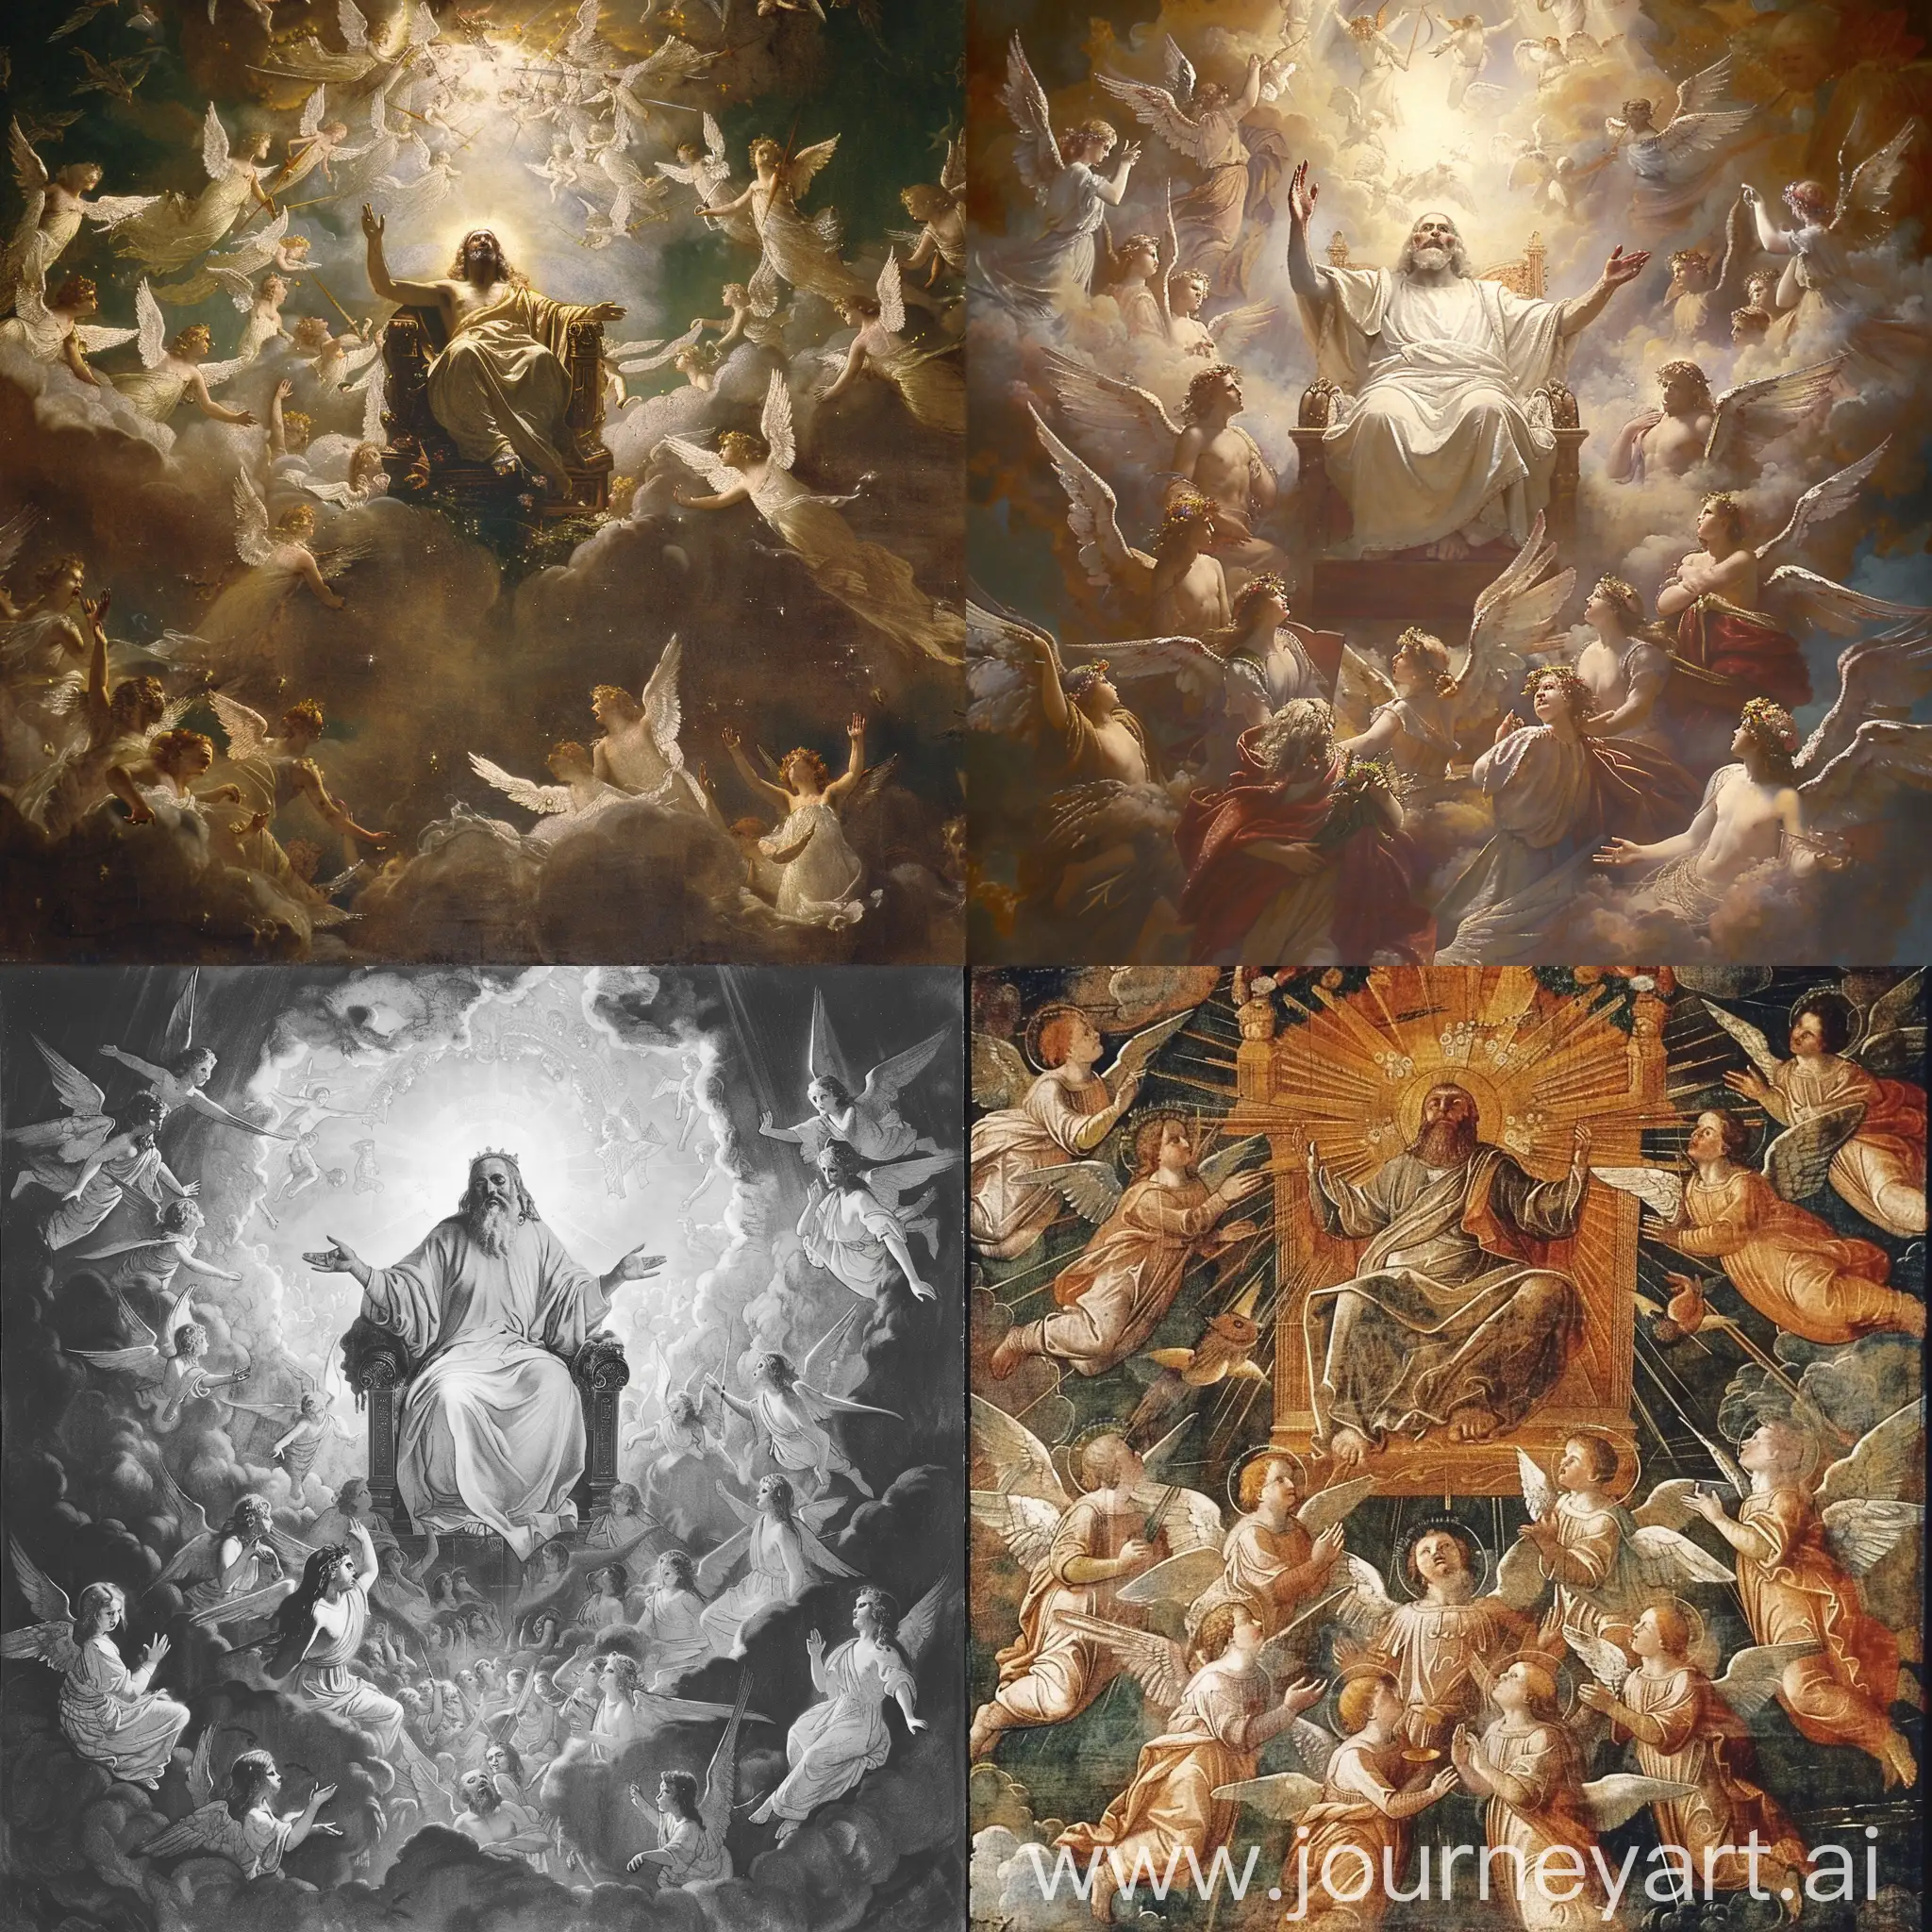 Divine-Presence-God-Enthroned-Surrounded-by-Angels